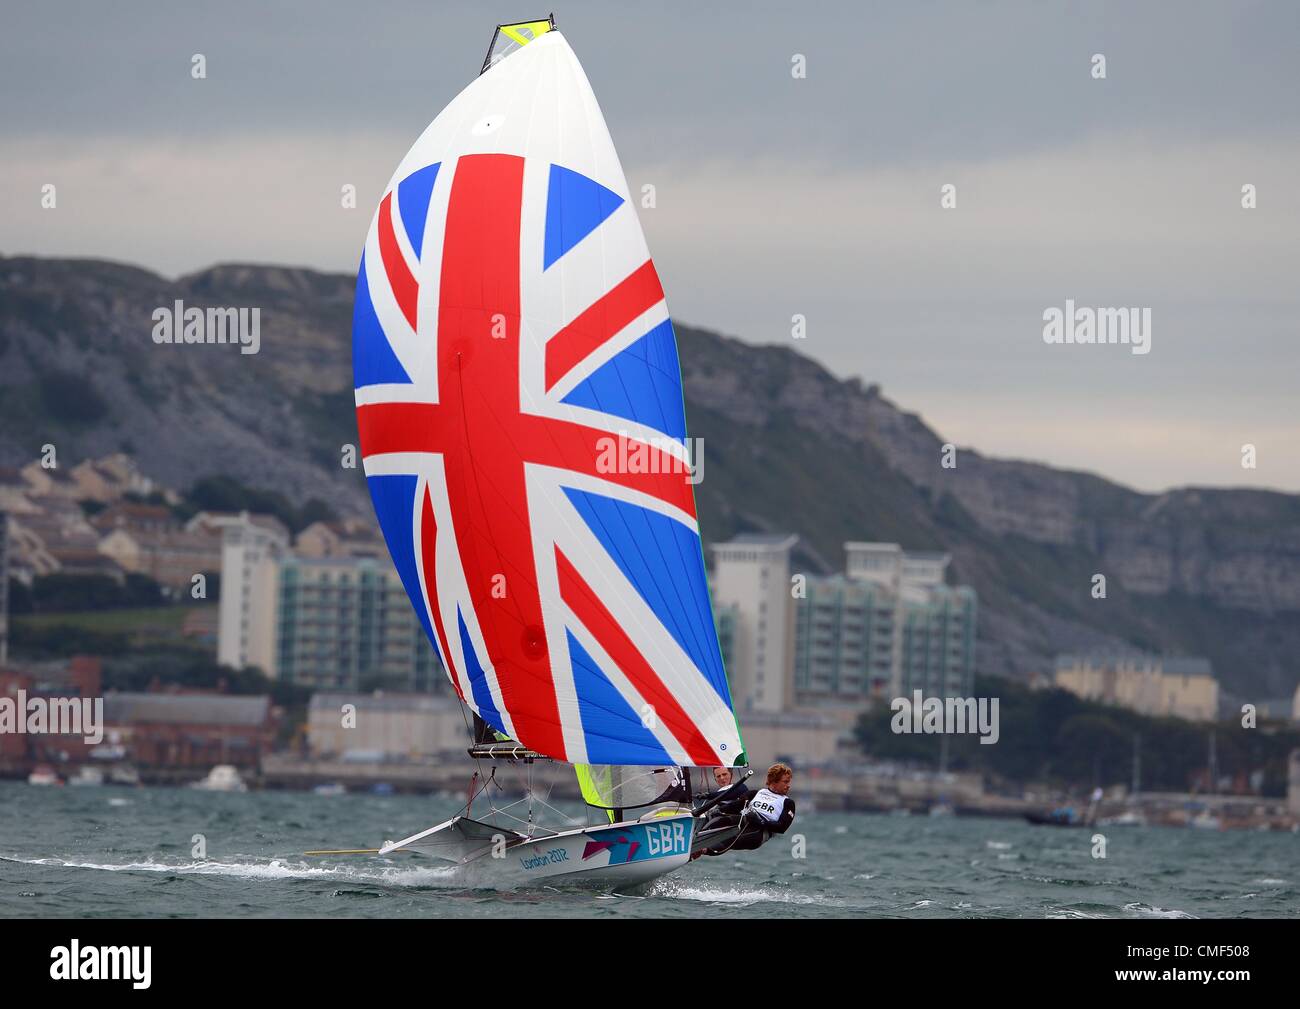 1st Aug 2012. London 2012 Olympics: Sailing, action during the London 2012 Olympic Games at the Weymouth & Portland Venue, Dorset, Britain, UK.  Stevie Morrison and Ben Rhodes from Great Britain in the Men's 49er race August 01st, 2012 PICTURE BY: DORSET MEDIA SERVICE Stock Photo